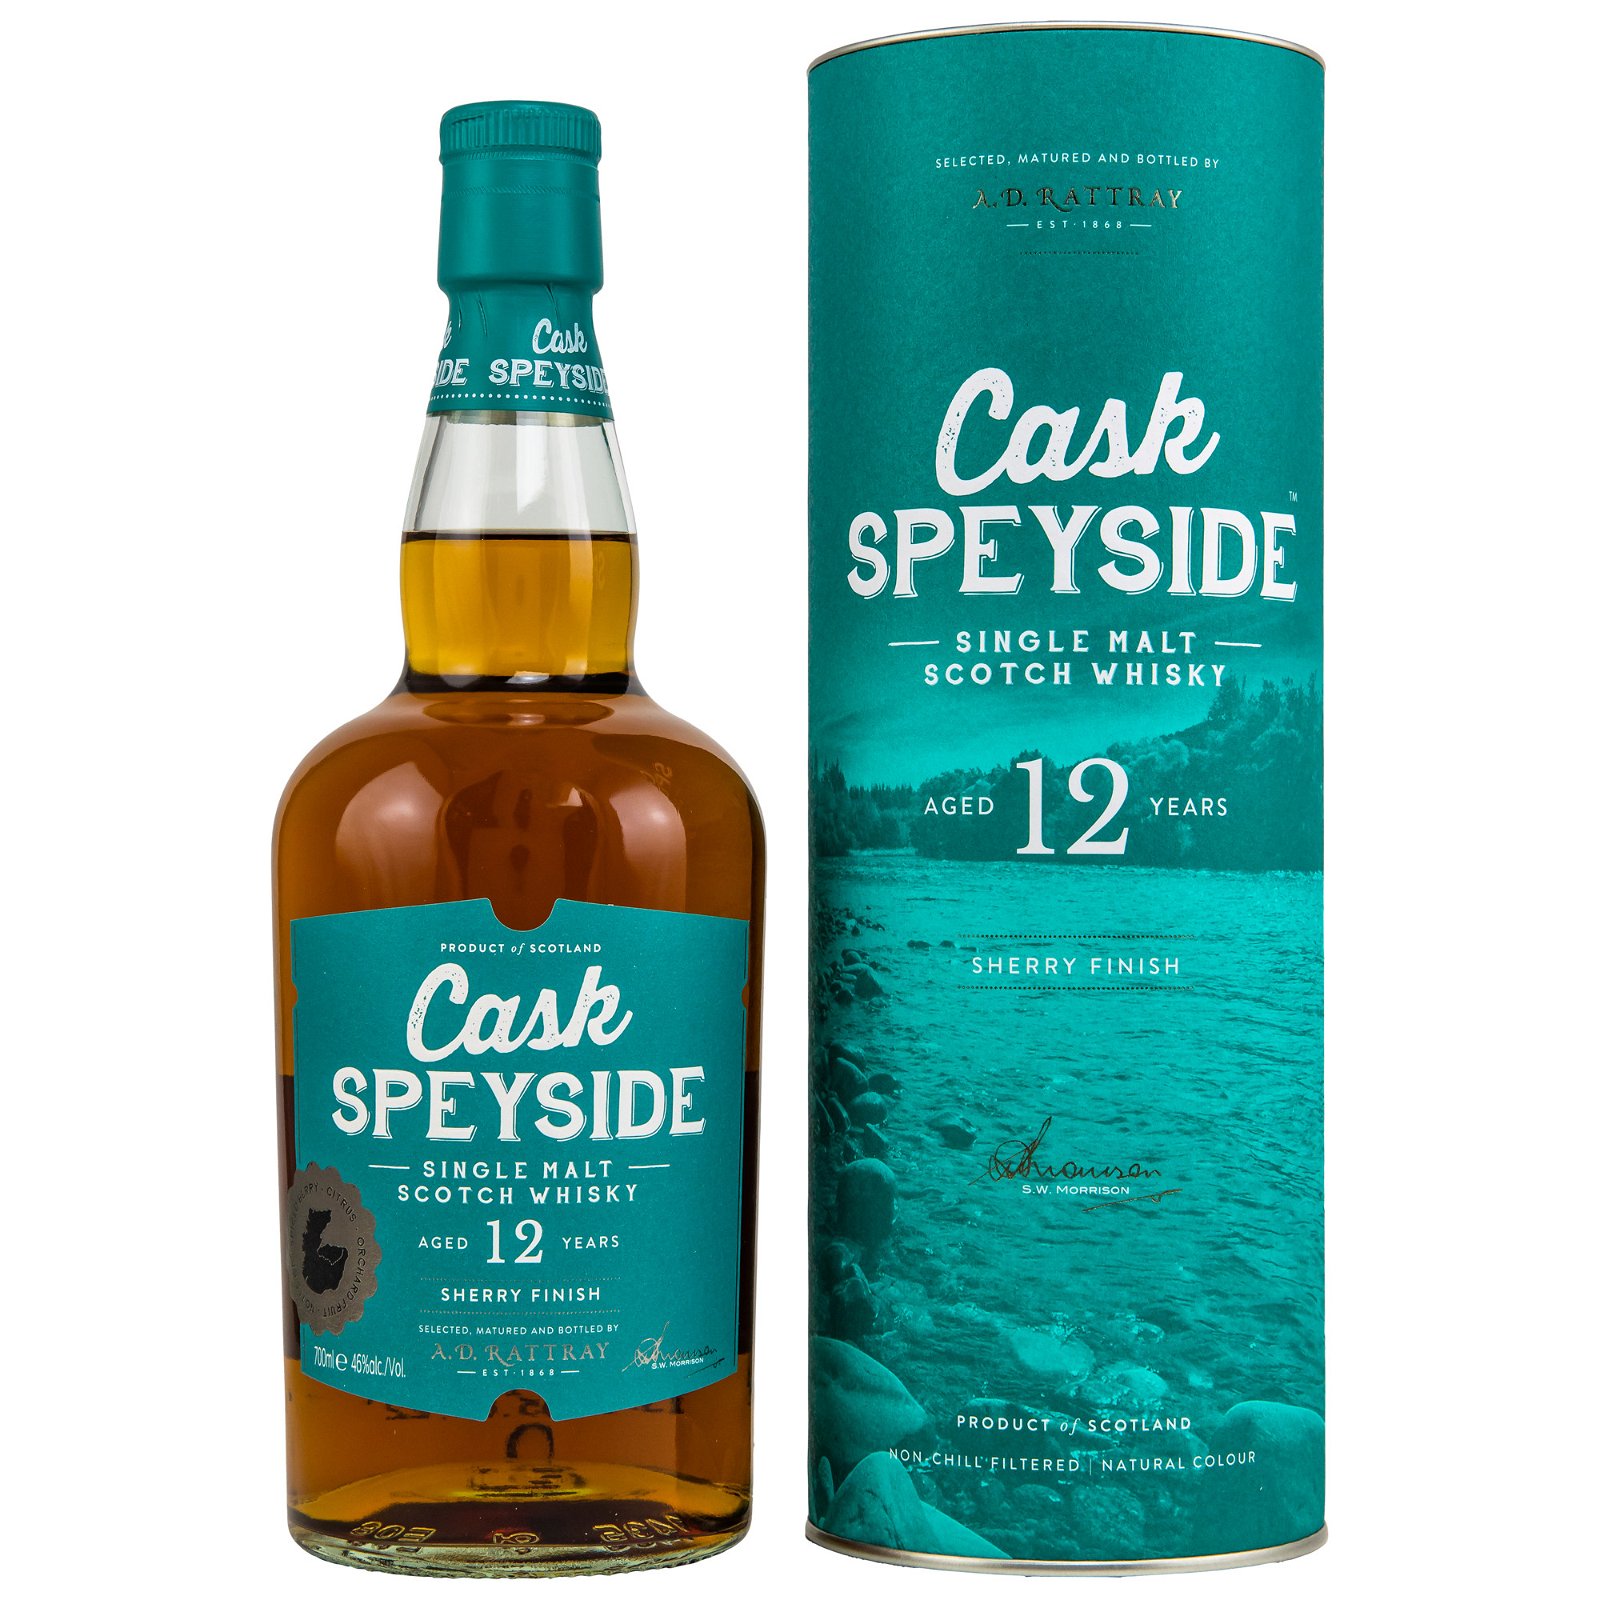 Cask Speyside 12 Jahre Sherry Finish (A.D. Rattray)